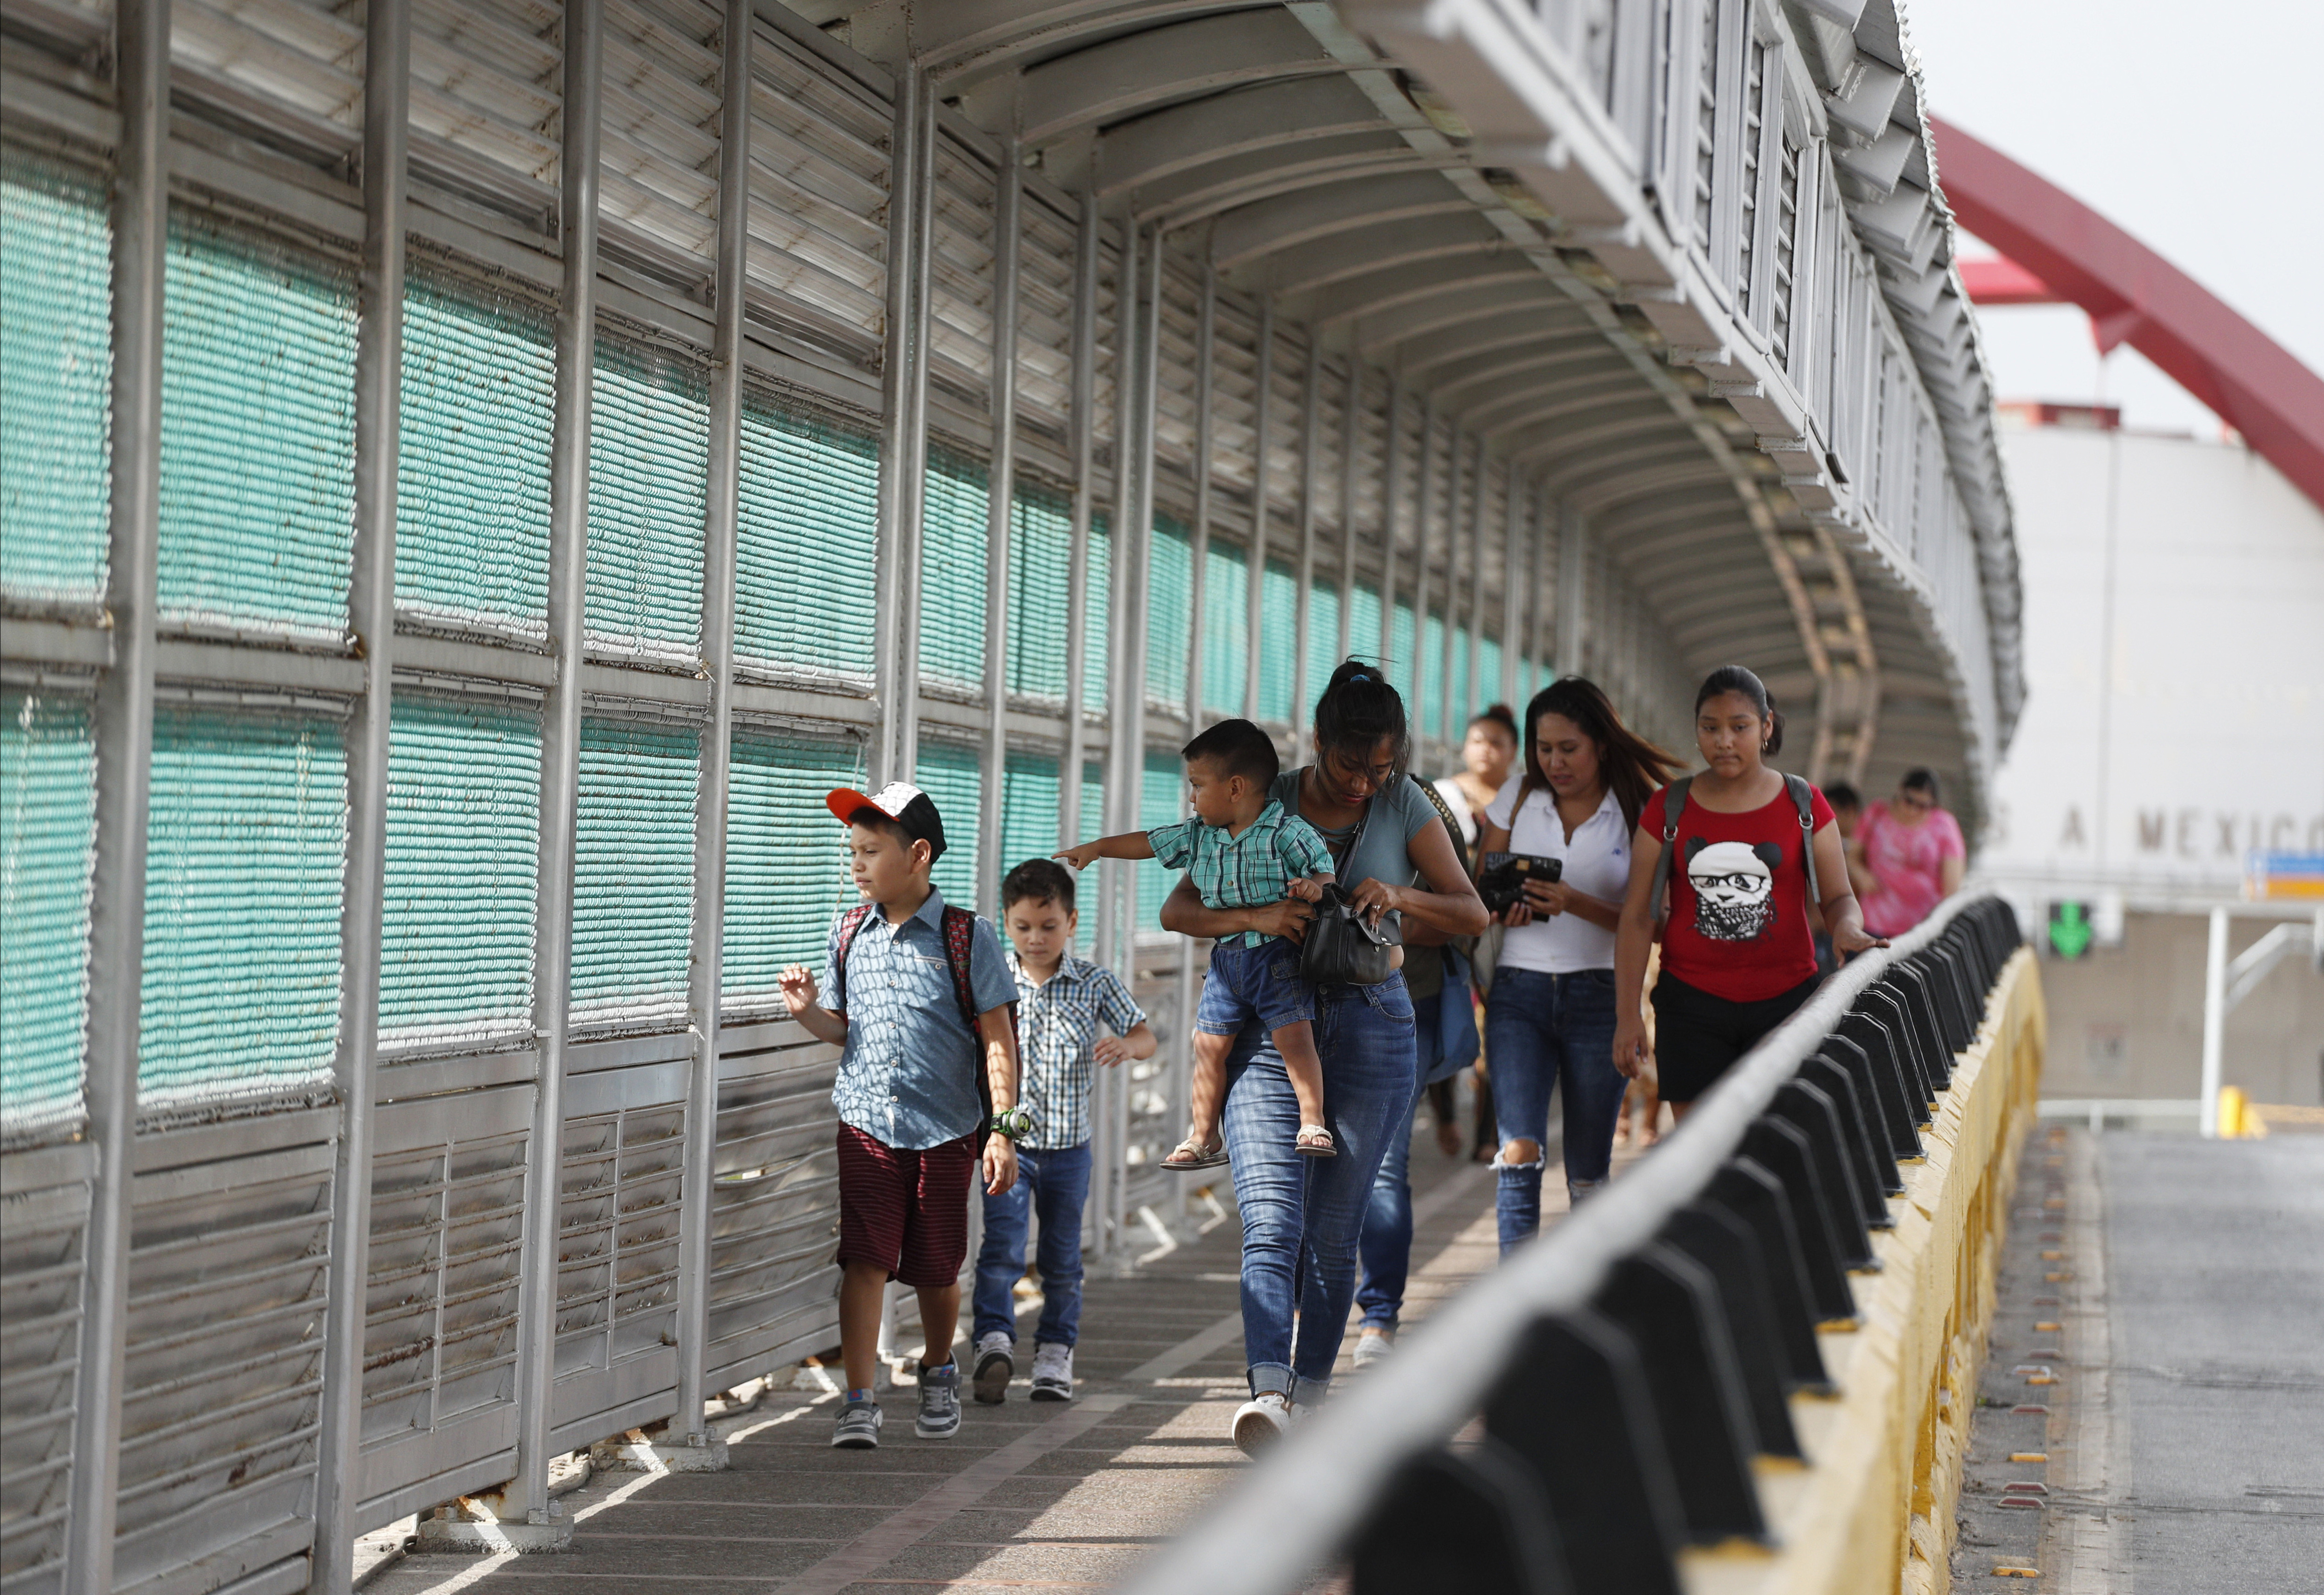 FILE - In this June 28, 2019 file photo, local residents with visas walk across the Puerta Mexico international bridge to enter the U.S., in Matamoros, Tamaulipas state, Mexico. A federal judge in Portland, Ore., on Saturday, Nov. 2, 2019, put on hold a Trump administration rule requiring immigrants prove they will have health insurance or can pay for medical care before they can get visas. U.S. District Judge Michael Simon granted a preliminary injunction that prevents the rule from going into effect Sunday. (AP Photo/Rebecca Blackwell, File)